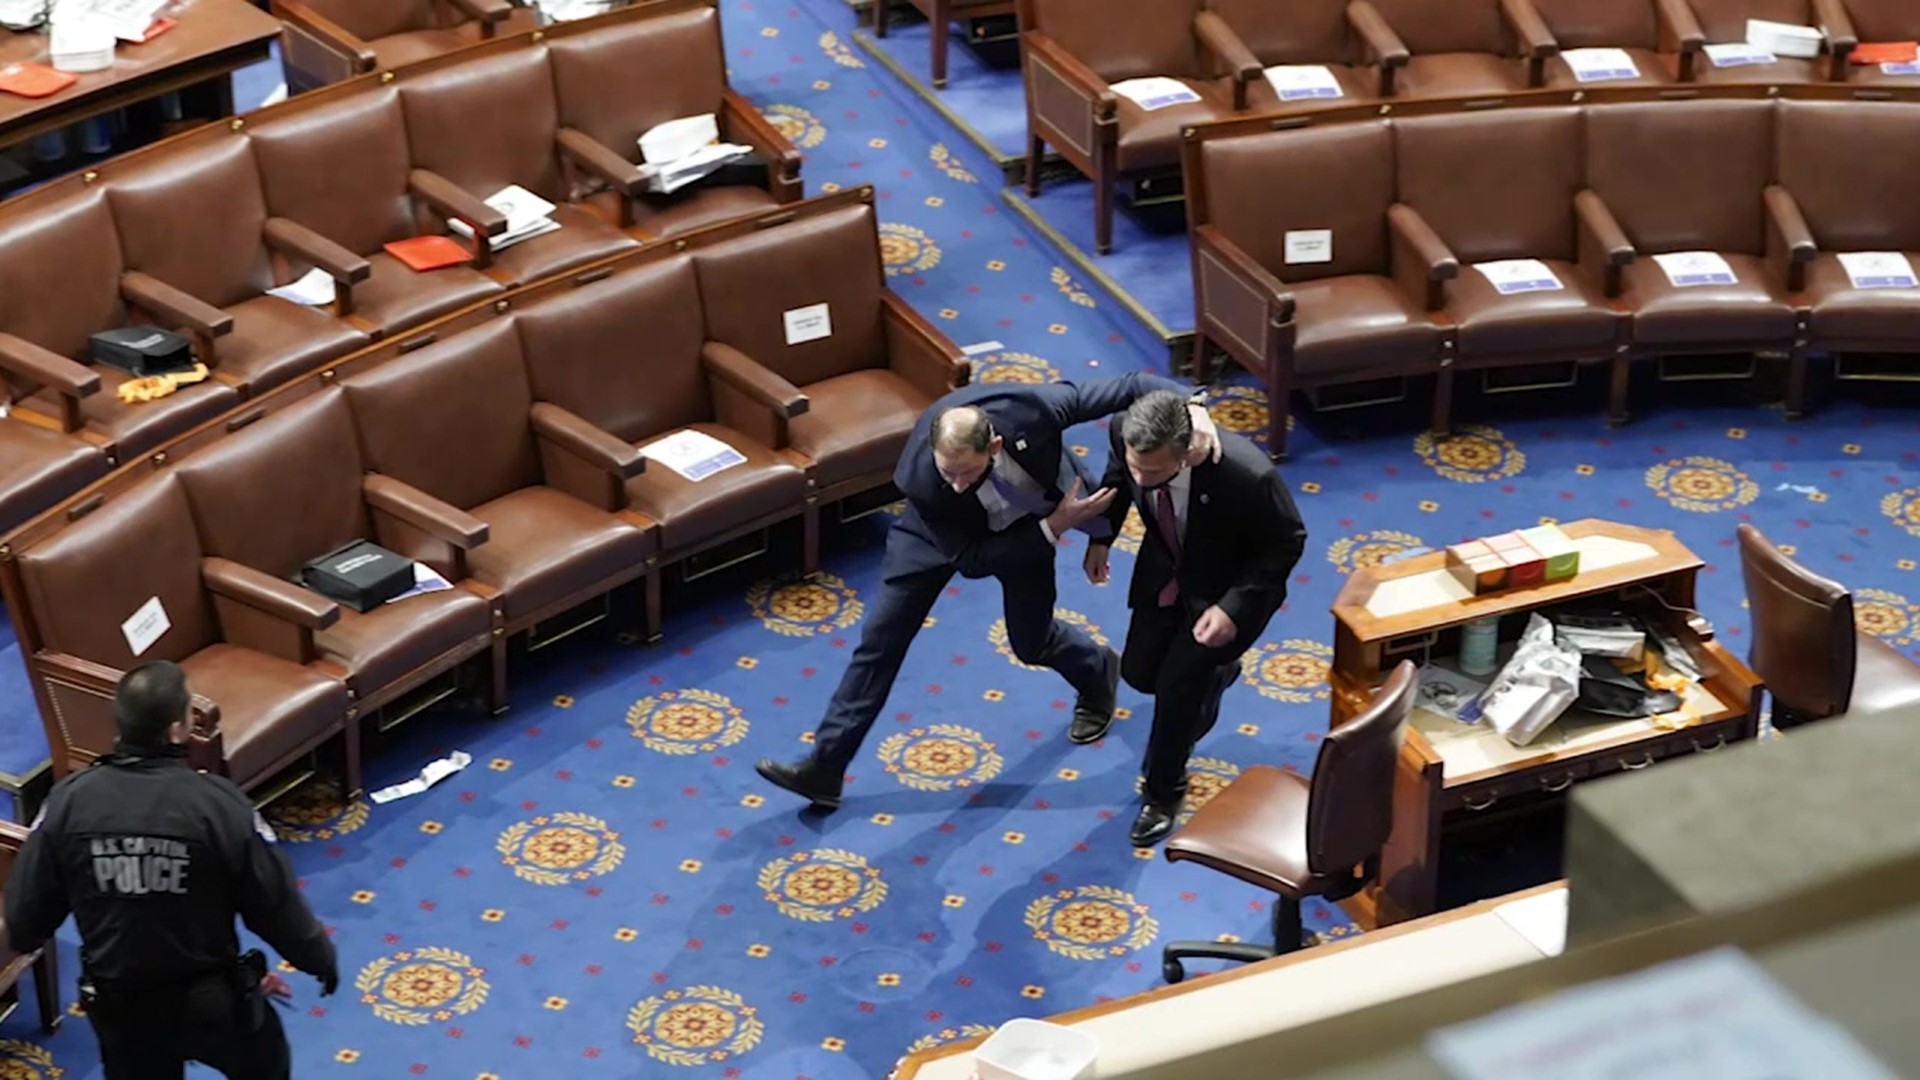 When the Capitol was stormed by protestors a senator from Pennsylvania had just finished speaking and a congressman from our area was near the door of the chamber.